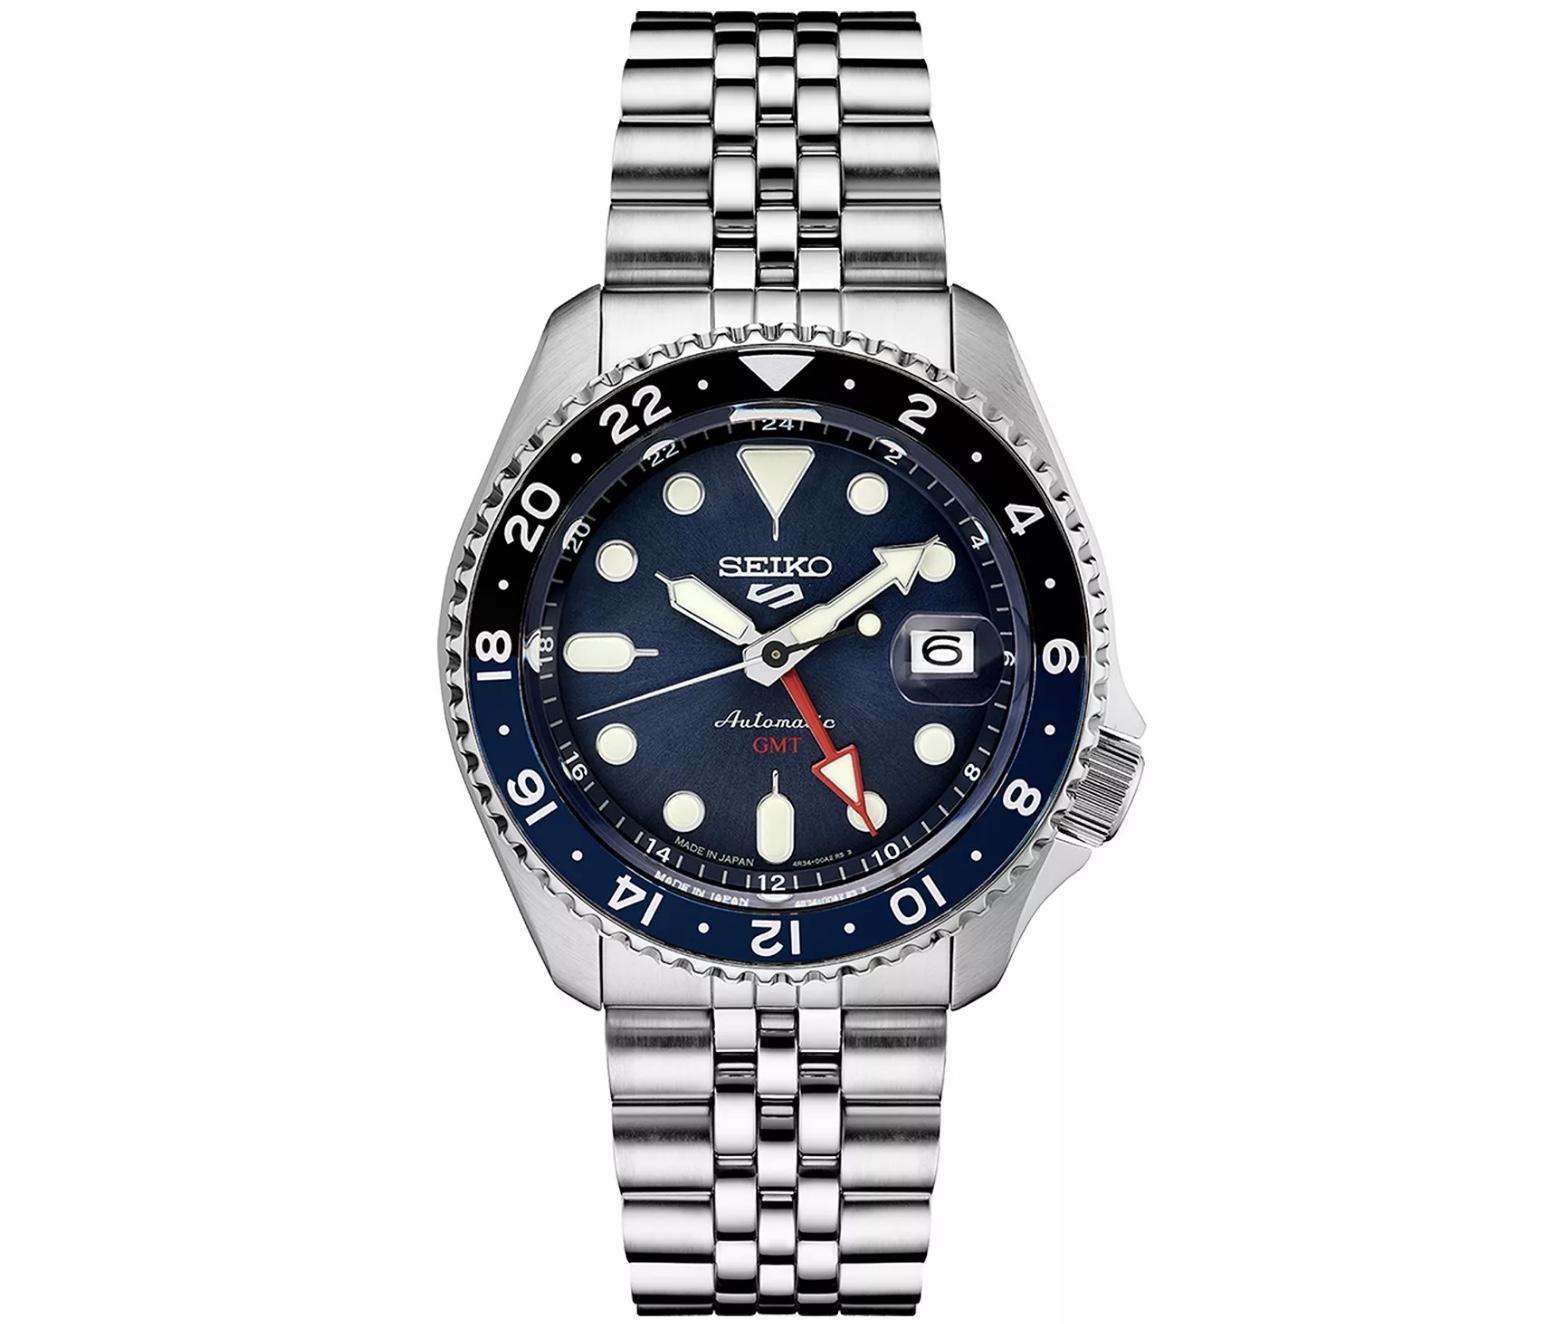 Seiko 5 Sports SKX GMT Series Stainless SSK003 Blue Dial Watch for $363.38 Shipped